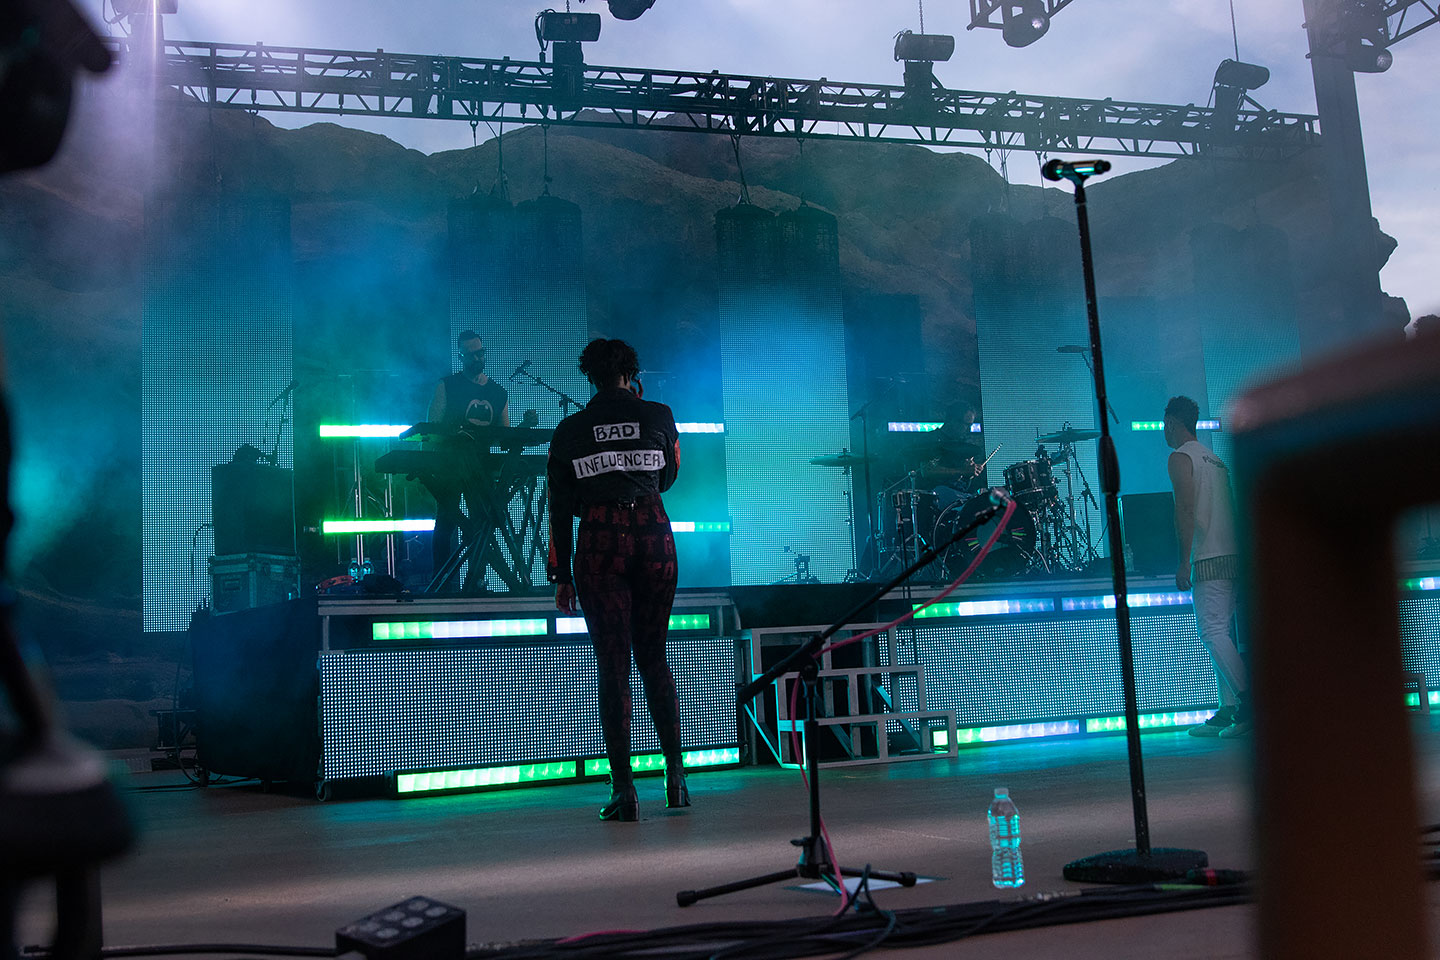 Young The Giant & Fitz and The Tantrums at Red Rocks 2019 - Denver Concert Photos